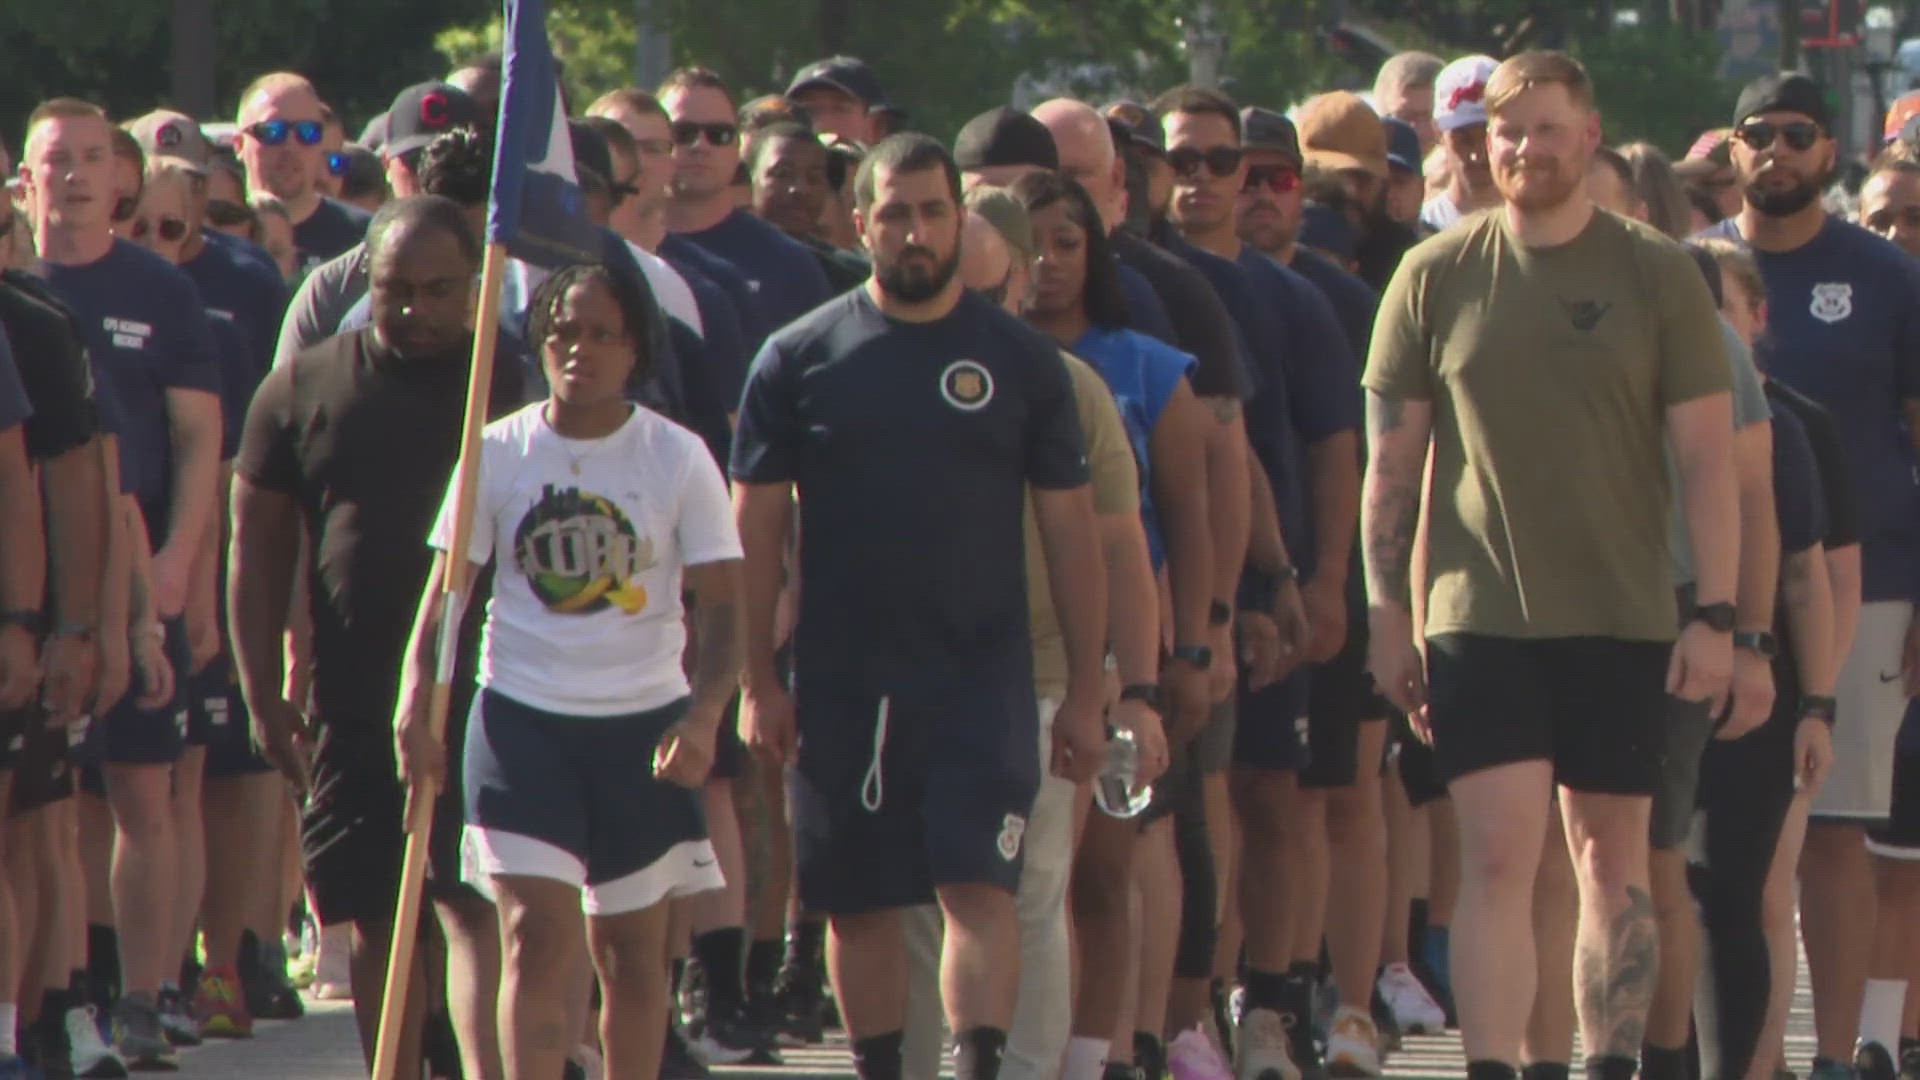 The group marched from police headquarters to the Greater Cleveland Peace Officers Memorial before running around the block.